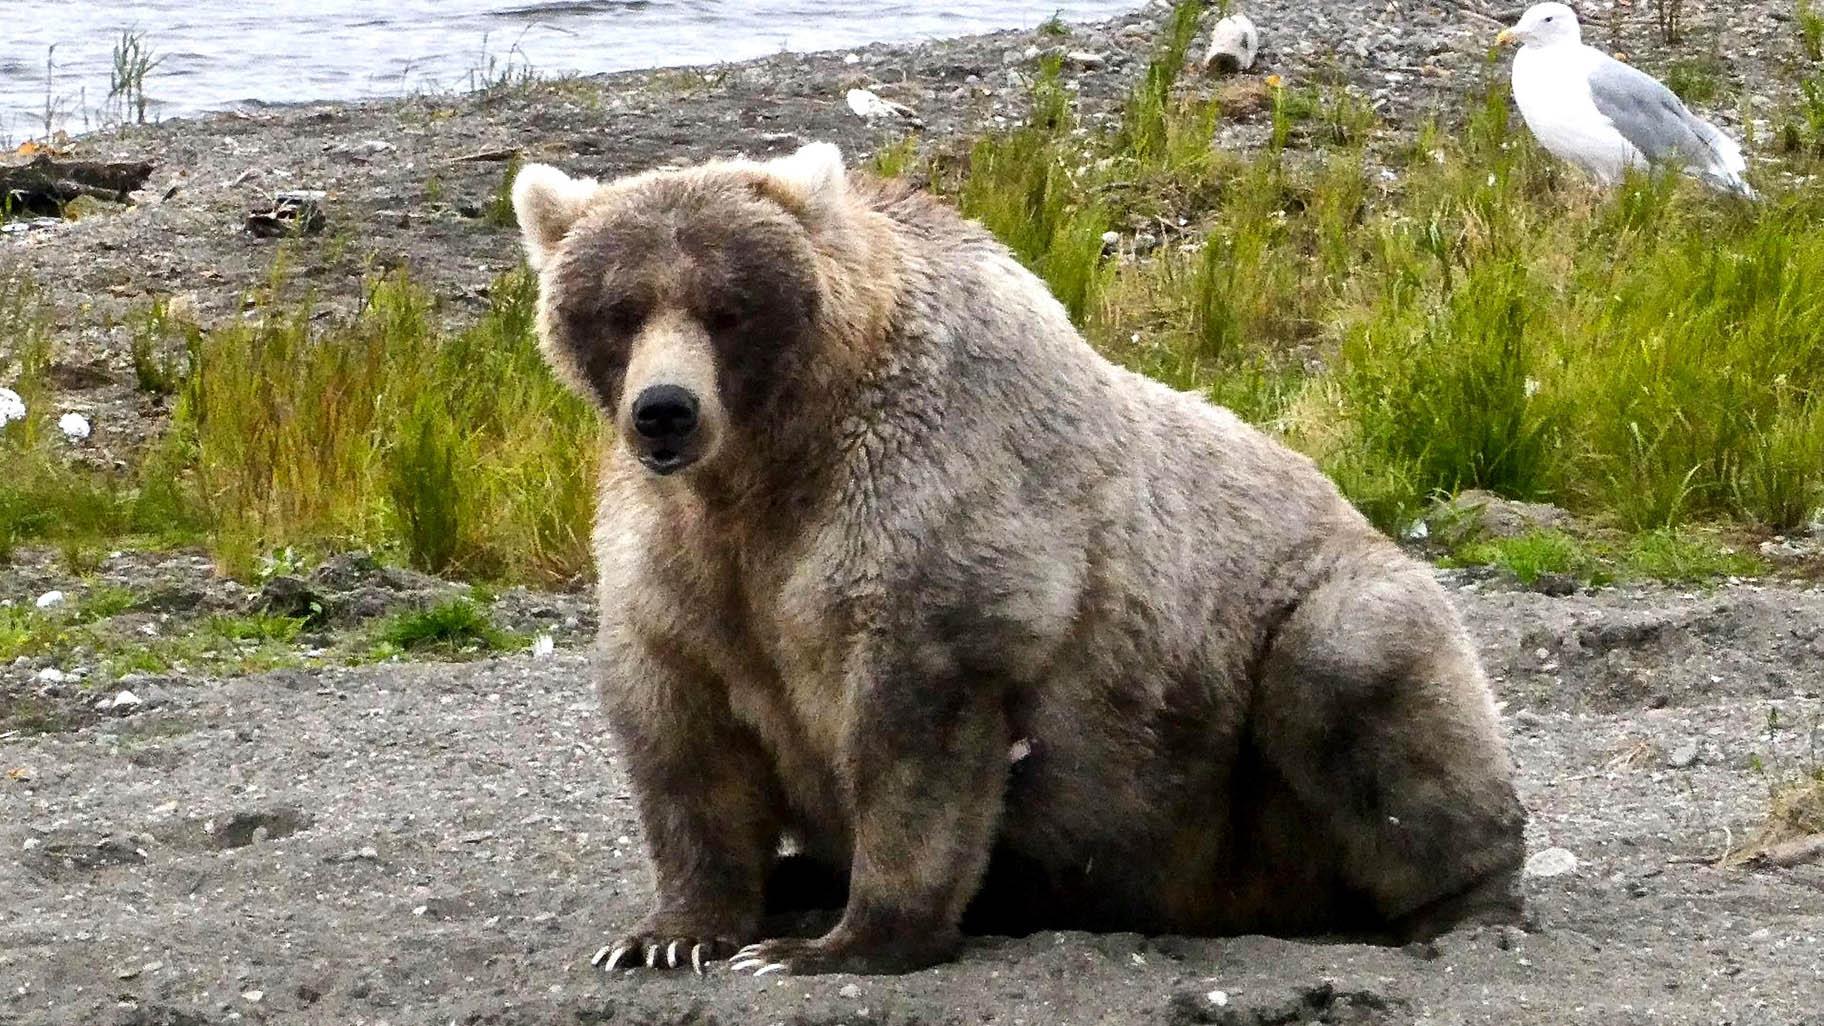 Holly, the 2019 Fat Bear champ, is looking to defend her crown. (Katmai National Park & Preserve / Facebook)